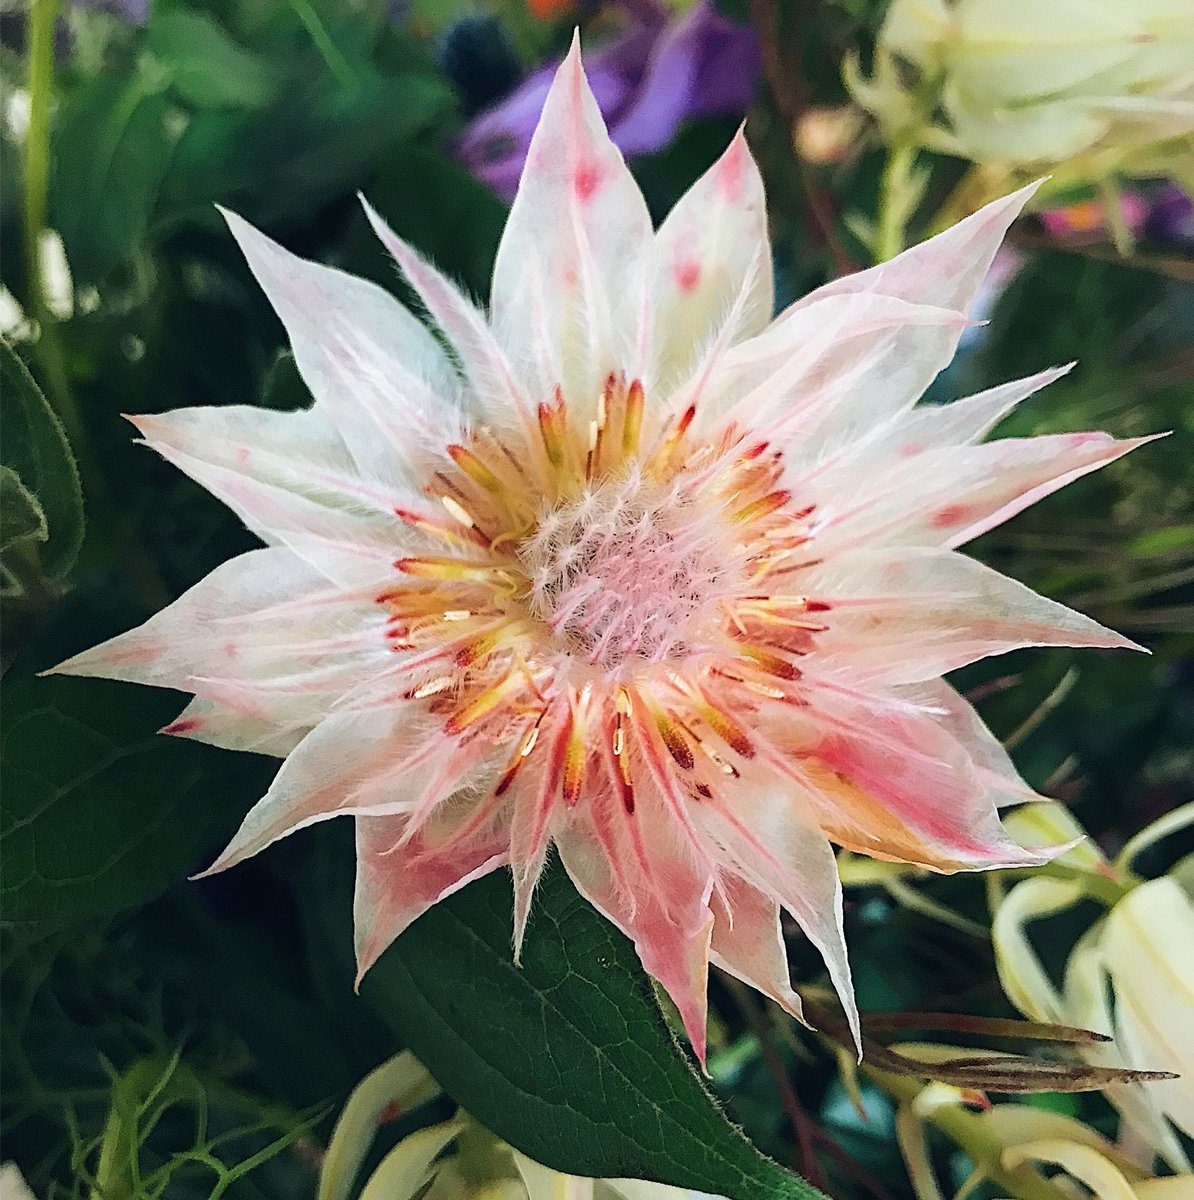 Magic tumbled from her pretty lips and when she spoke the language of the universe– the stars sighed in unison.

#flowerswithmeaning #supportlocal #hammersmithflowers #birthdays  #floralperfection #W6flowers  #askewroad #brackenburyvillage #w12flowers #localbusiness